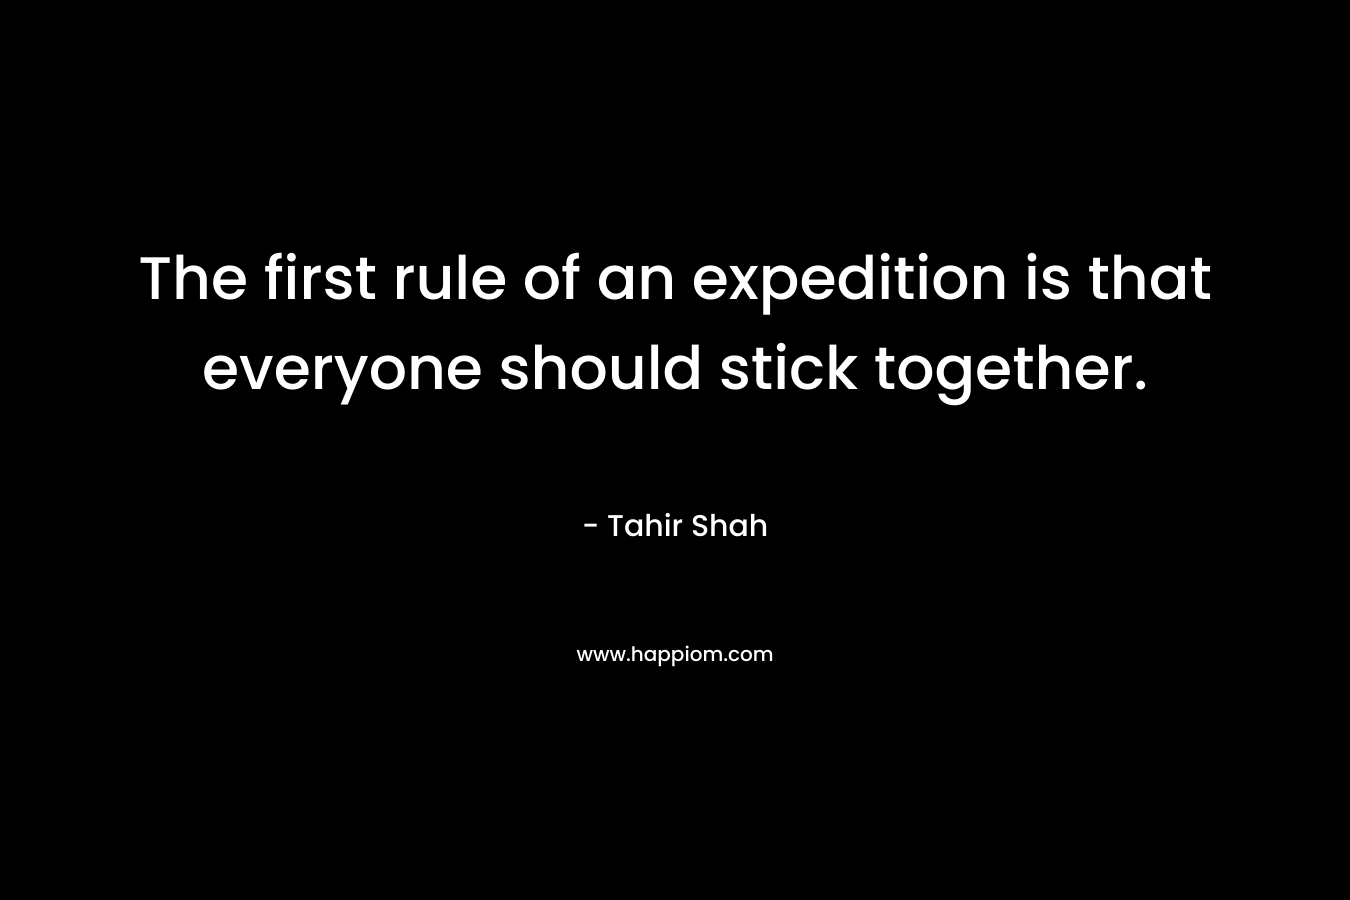 The first rule of an expedition is that everyone should stick together. – Tahir Shah